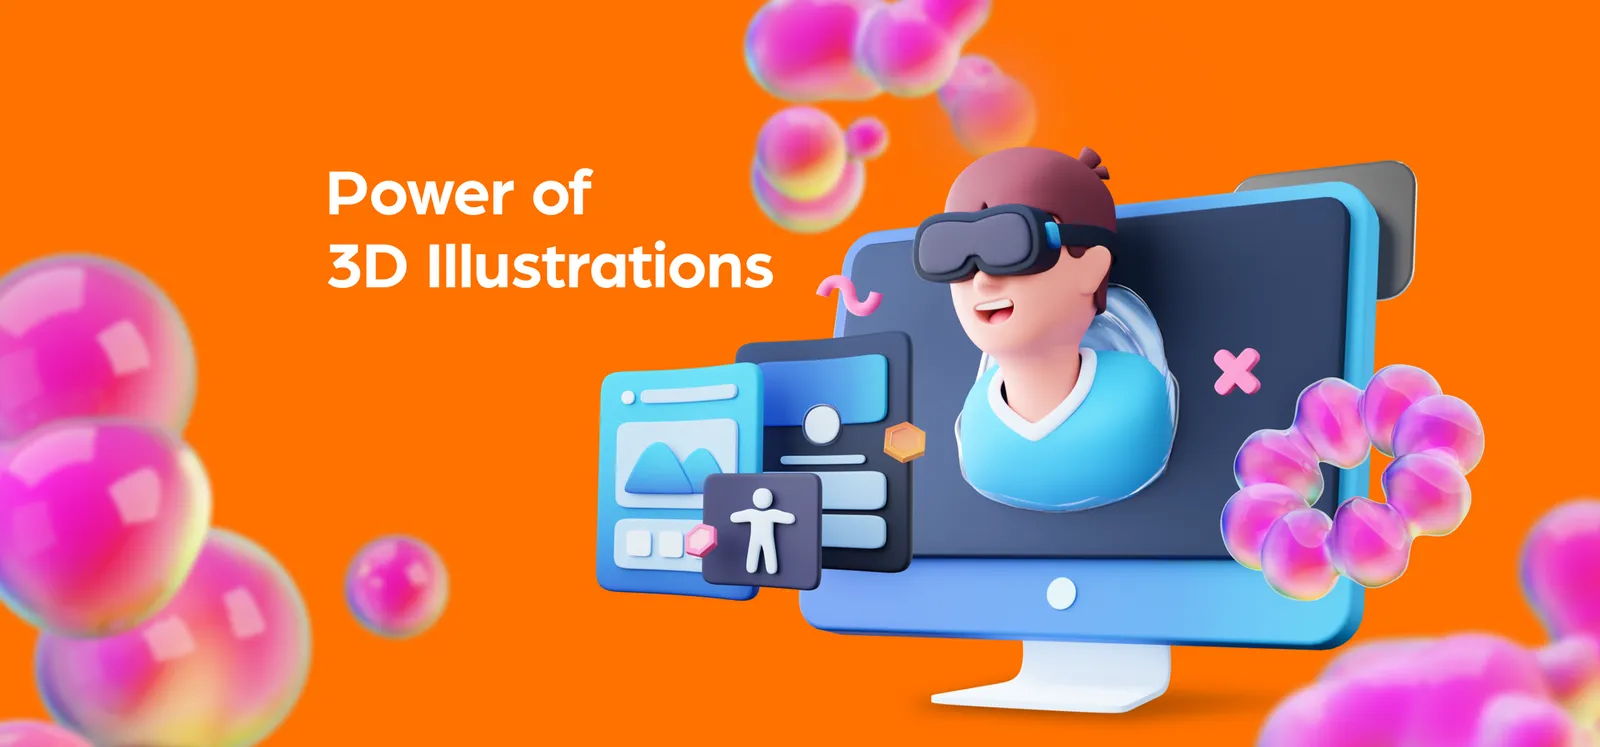 How and Where to Use 3D Illustrations